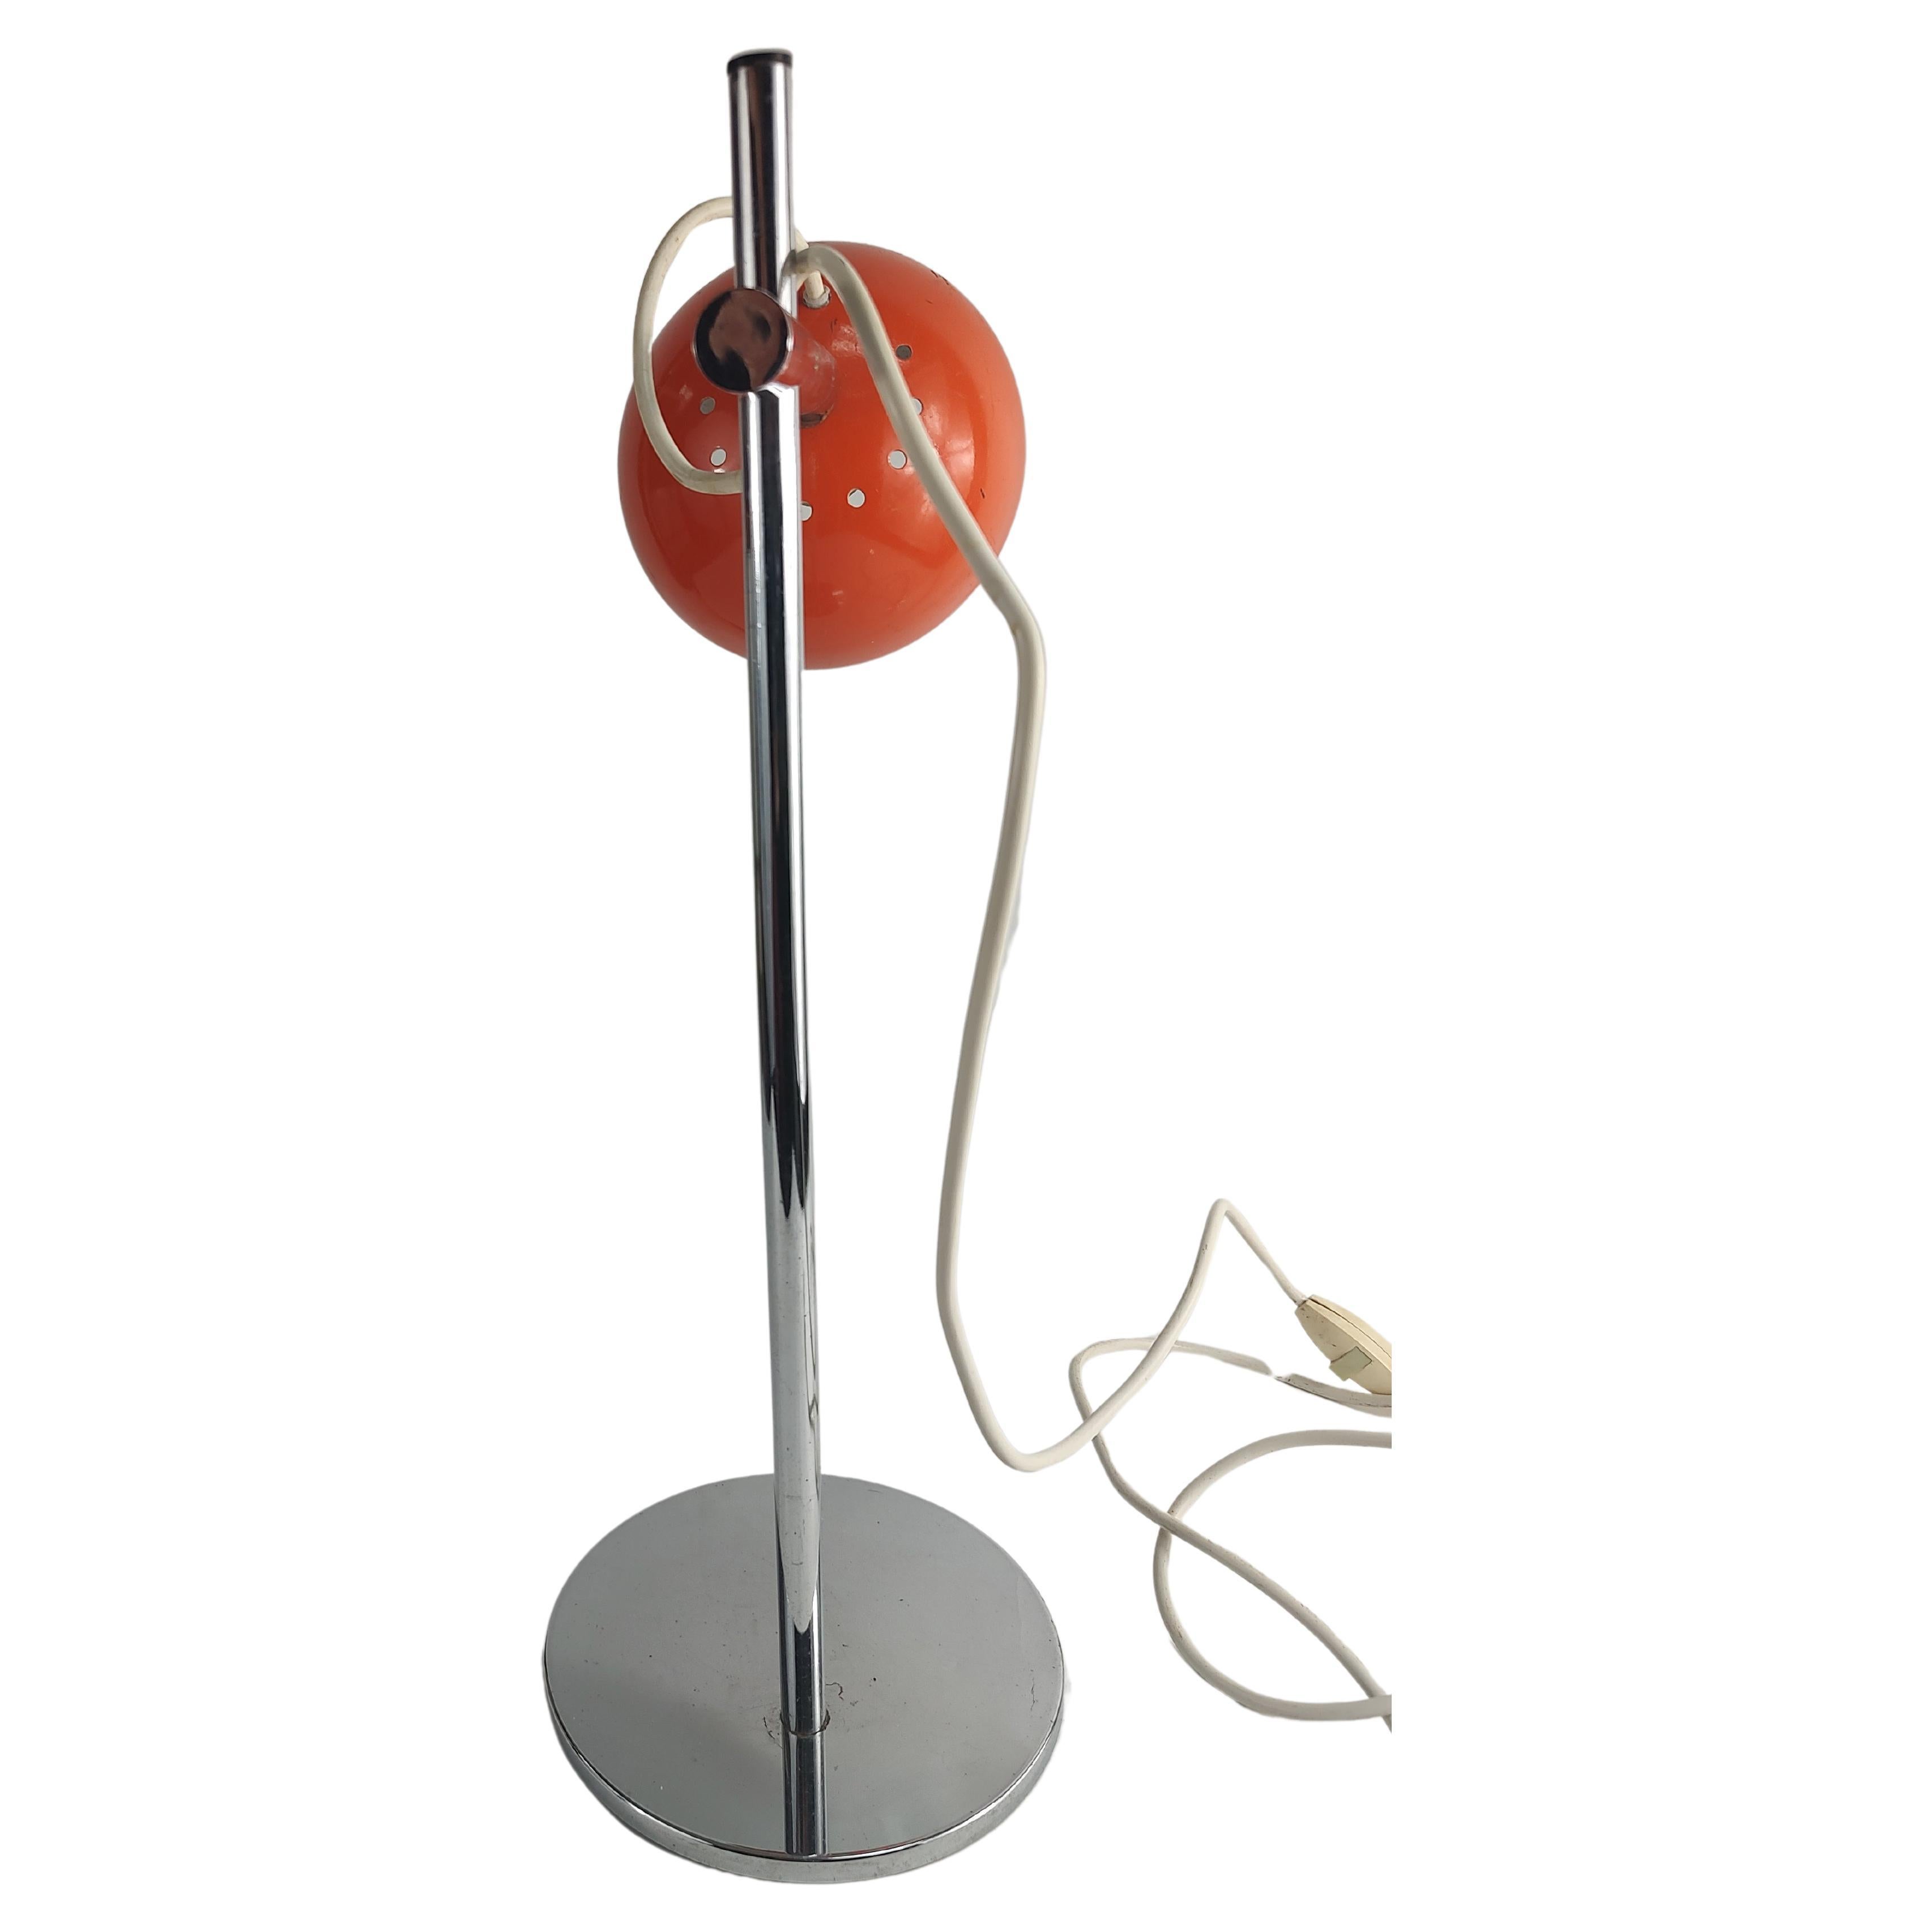 Fabulous eye ball style lamp in orange with a chrome base and shaft. Eye ball shade is fully adjustable. Chrome is in excellent vintage condition shade has some wear see pics.